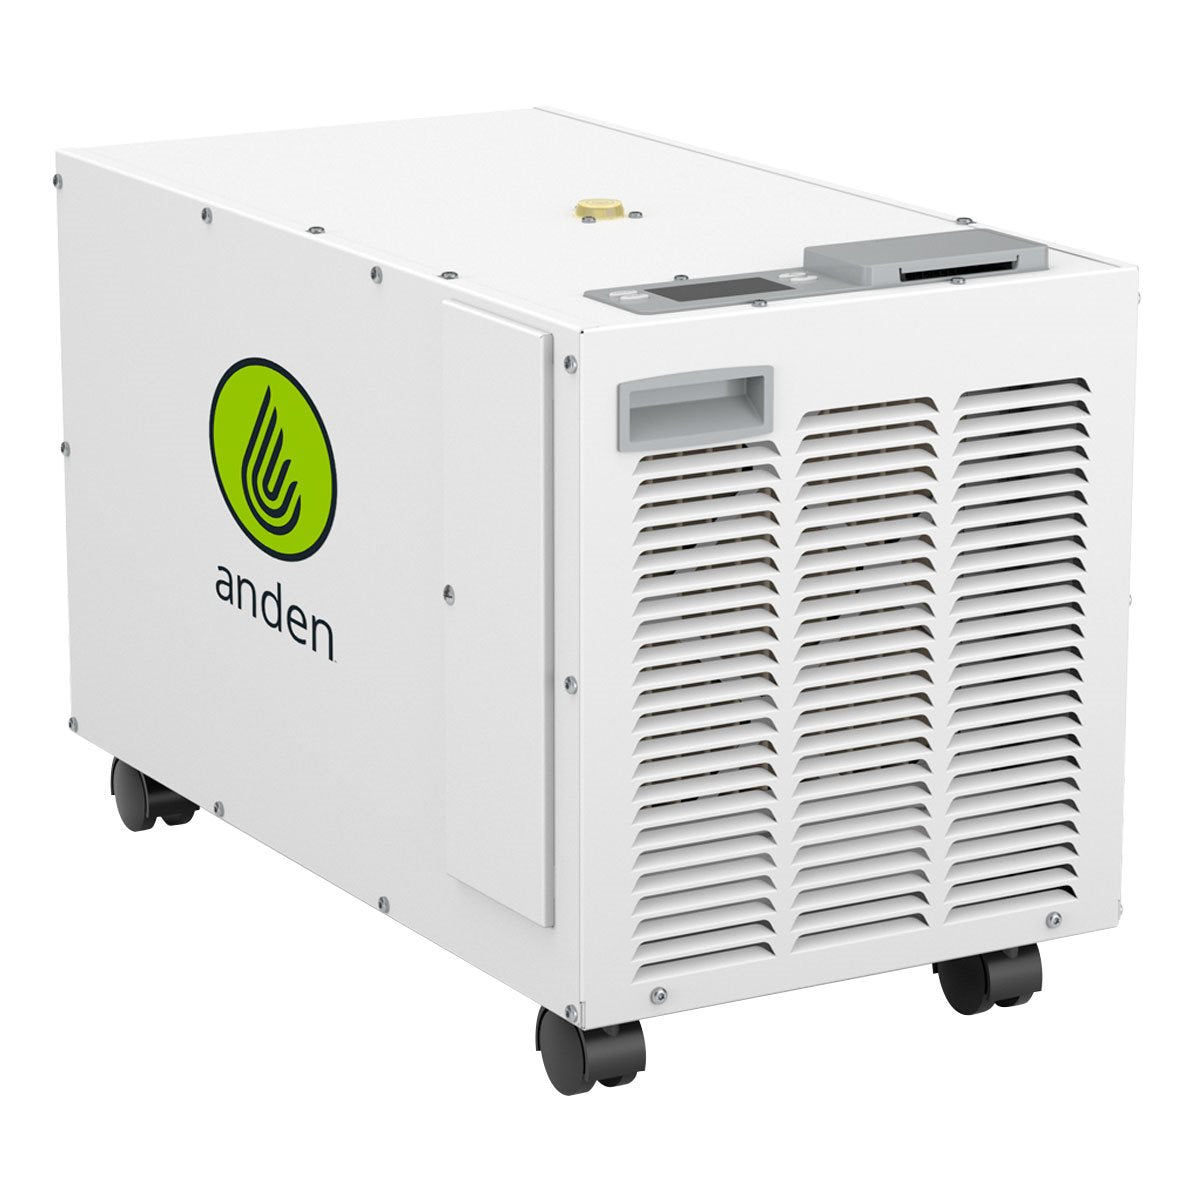 Product Secondary Image:Anden Dehumidifier 100 Pints / Day W / Caster Wheel